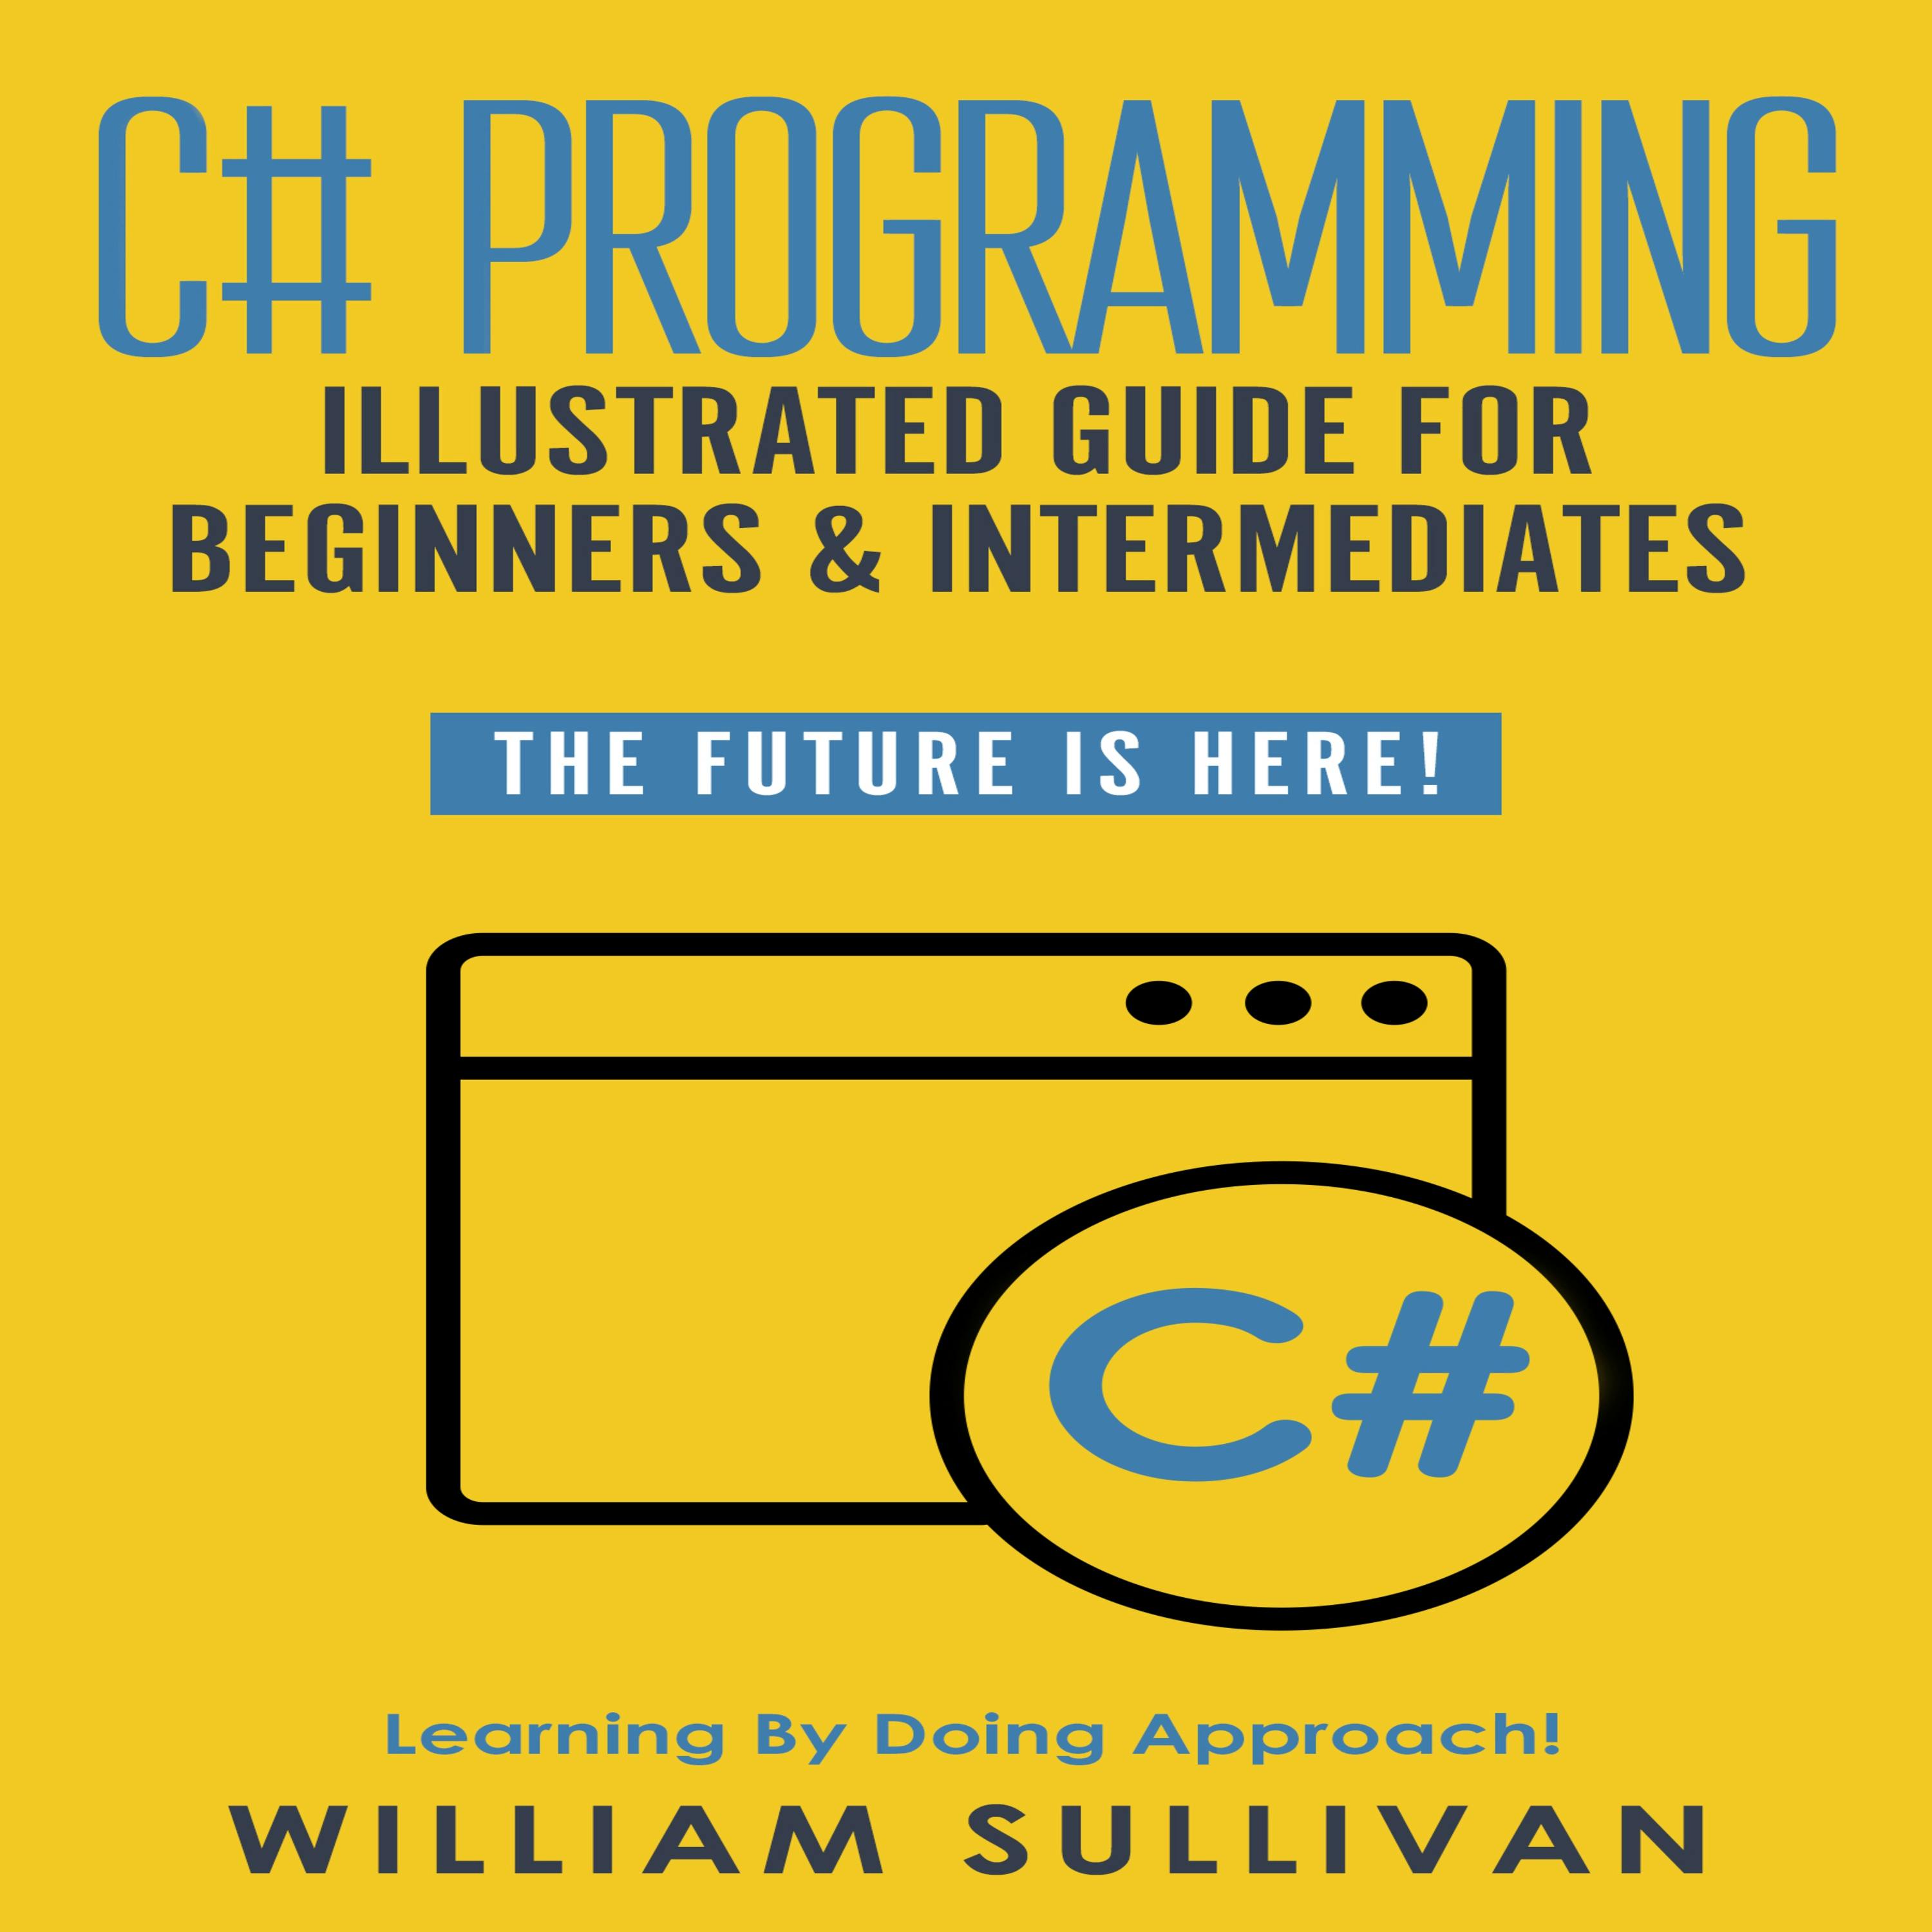 C# Programming Illustrated Guide For Beginners & Intermediates: The Future Is Here! Learning By Doing Approach - undefined